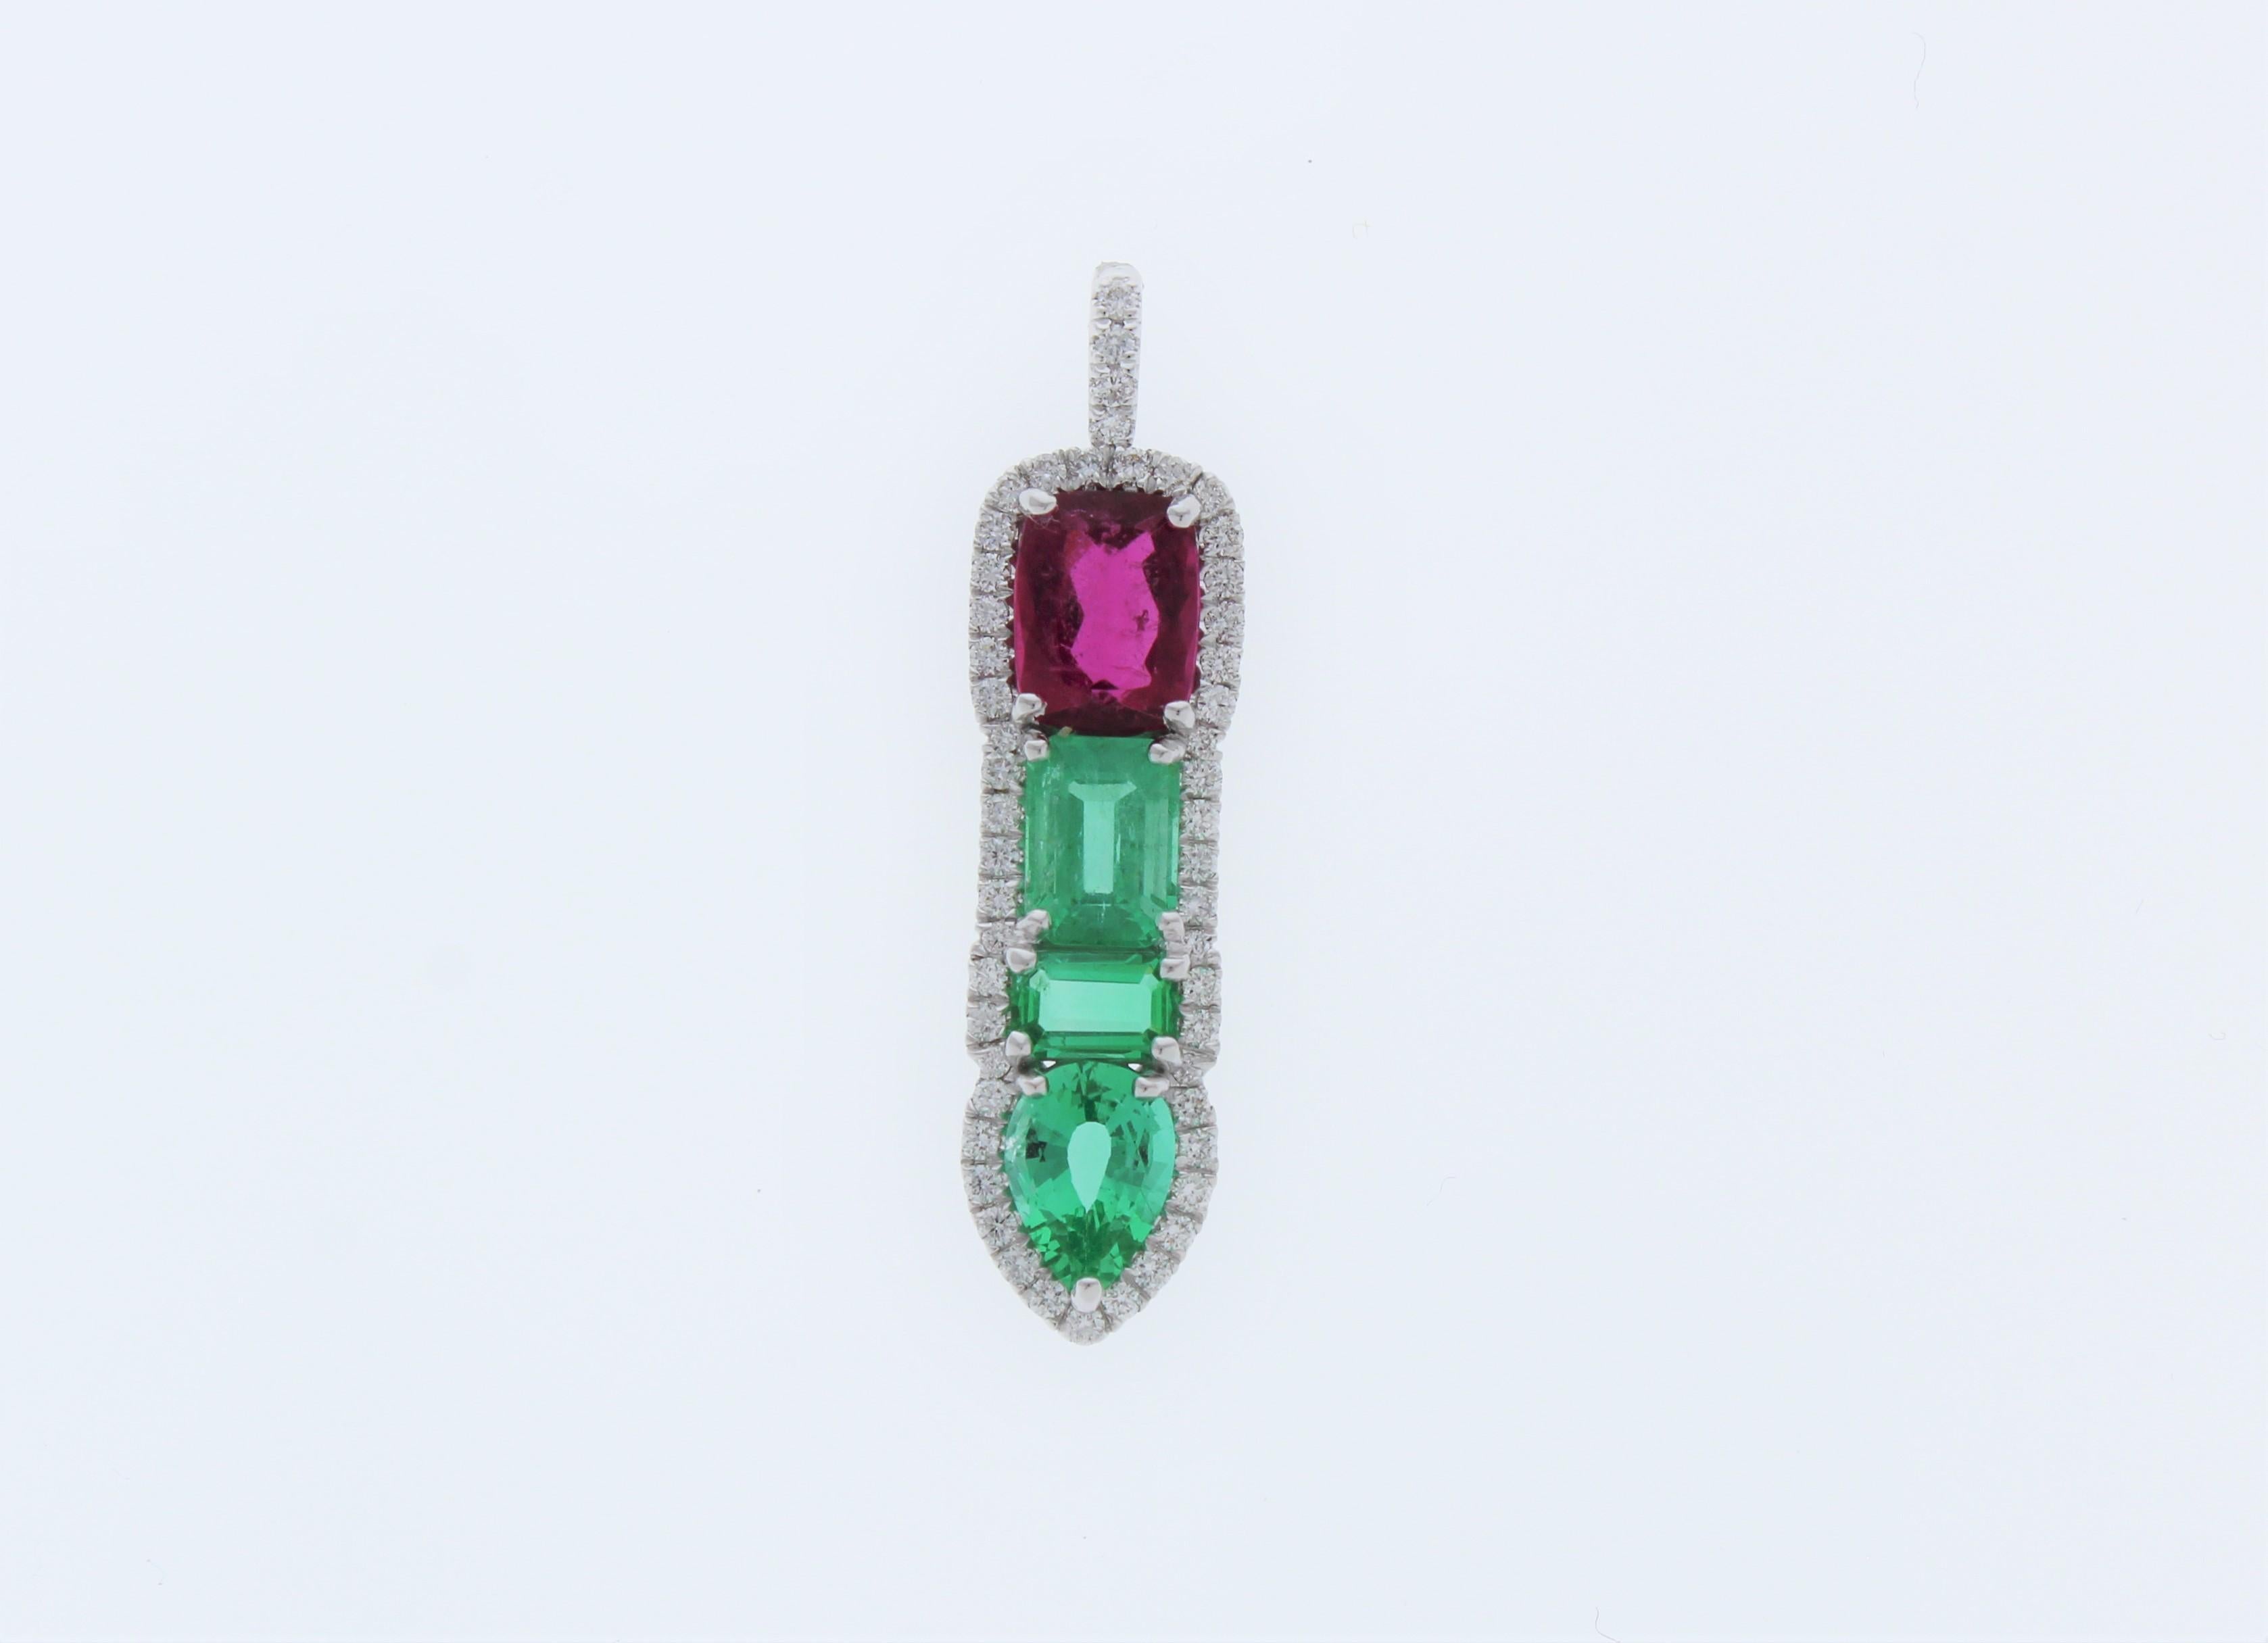 When you present this gorgeous rubellite and emerald 14k White Gold pendant to your favorite lady, she will be completely thrilled! This pendant includes 3.77CTW of Rubellite and Emerald gemstones and Round Diamonds 0.46CTW. This piece is perfect